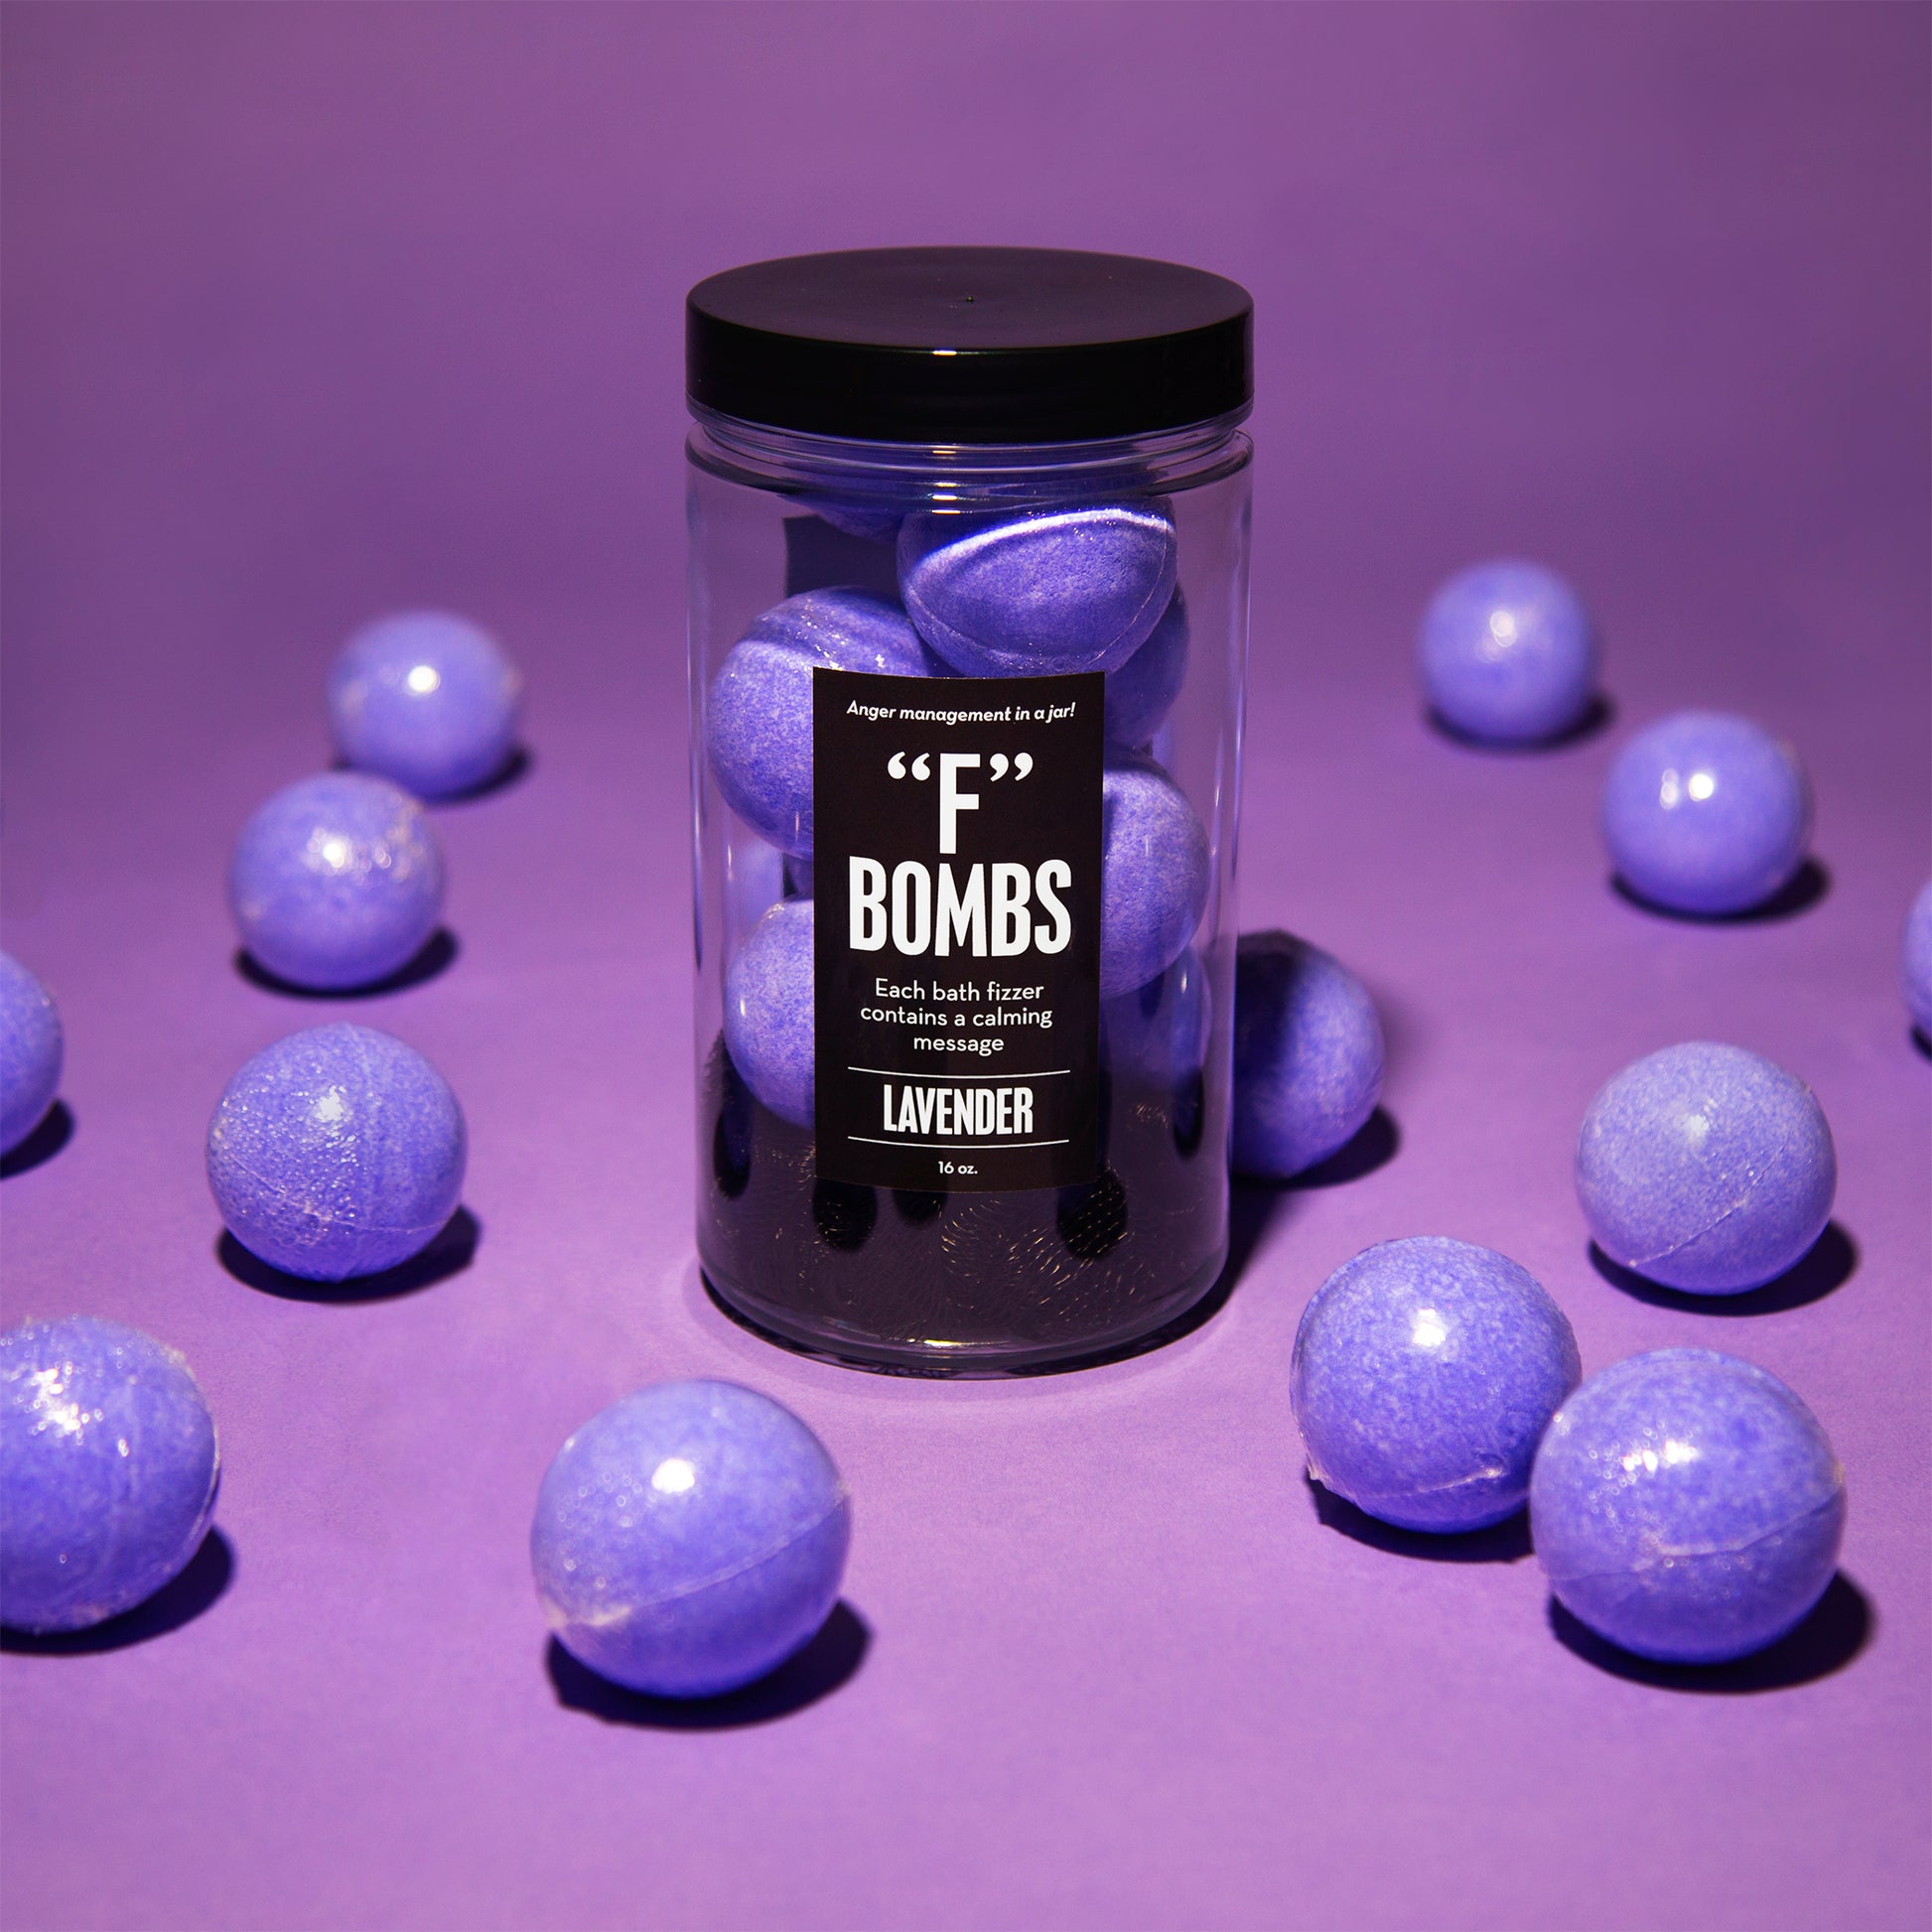 Close up of "F' Bombs bath bombs jar with purple background